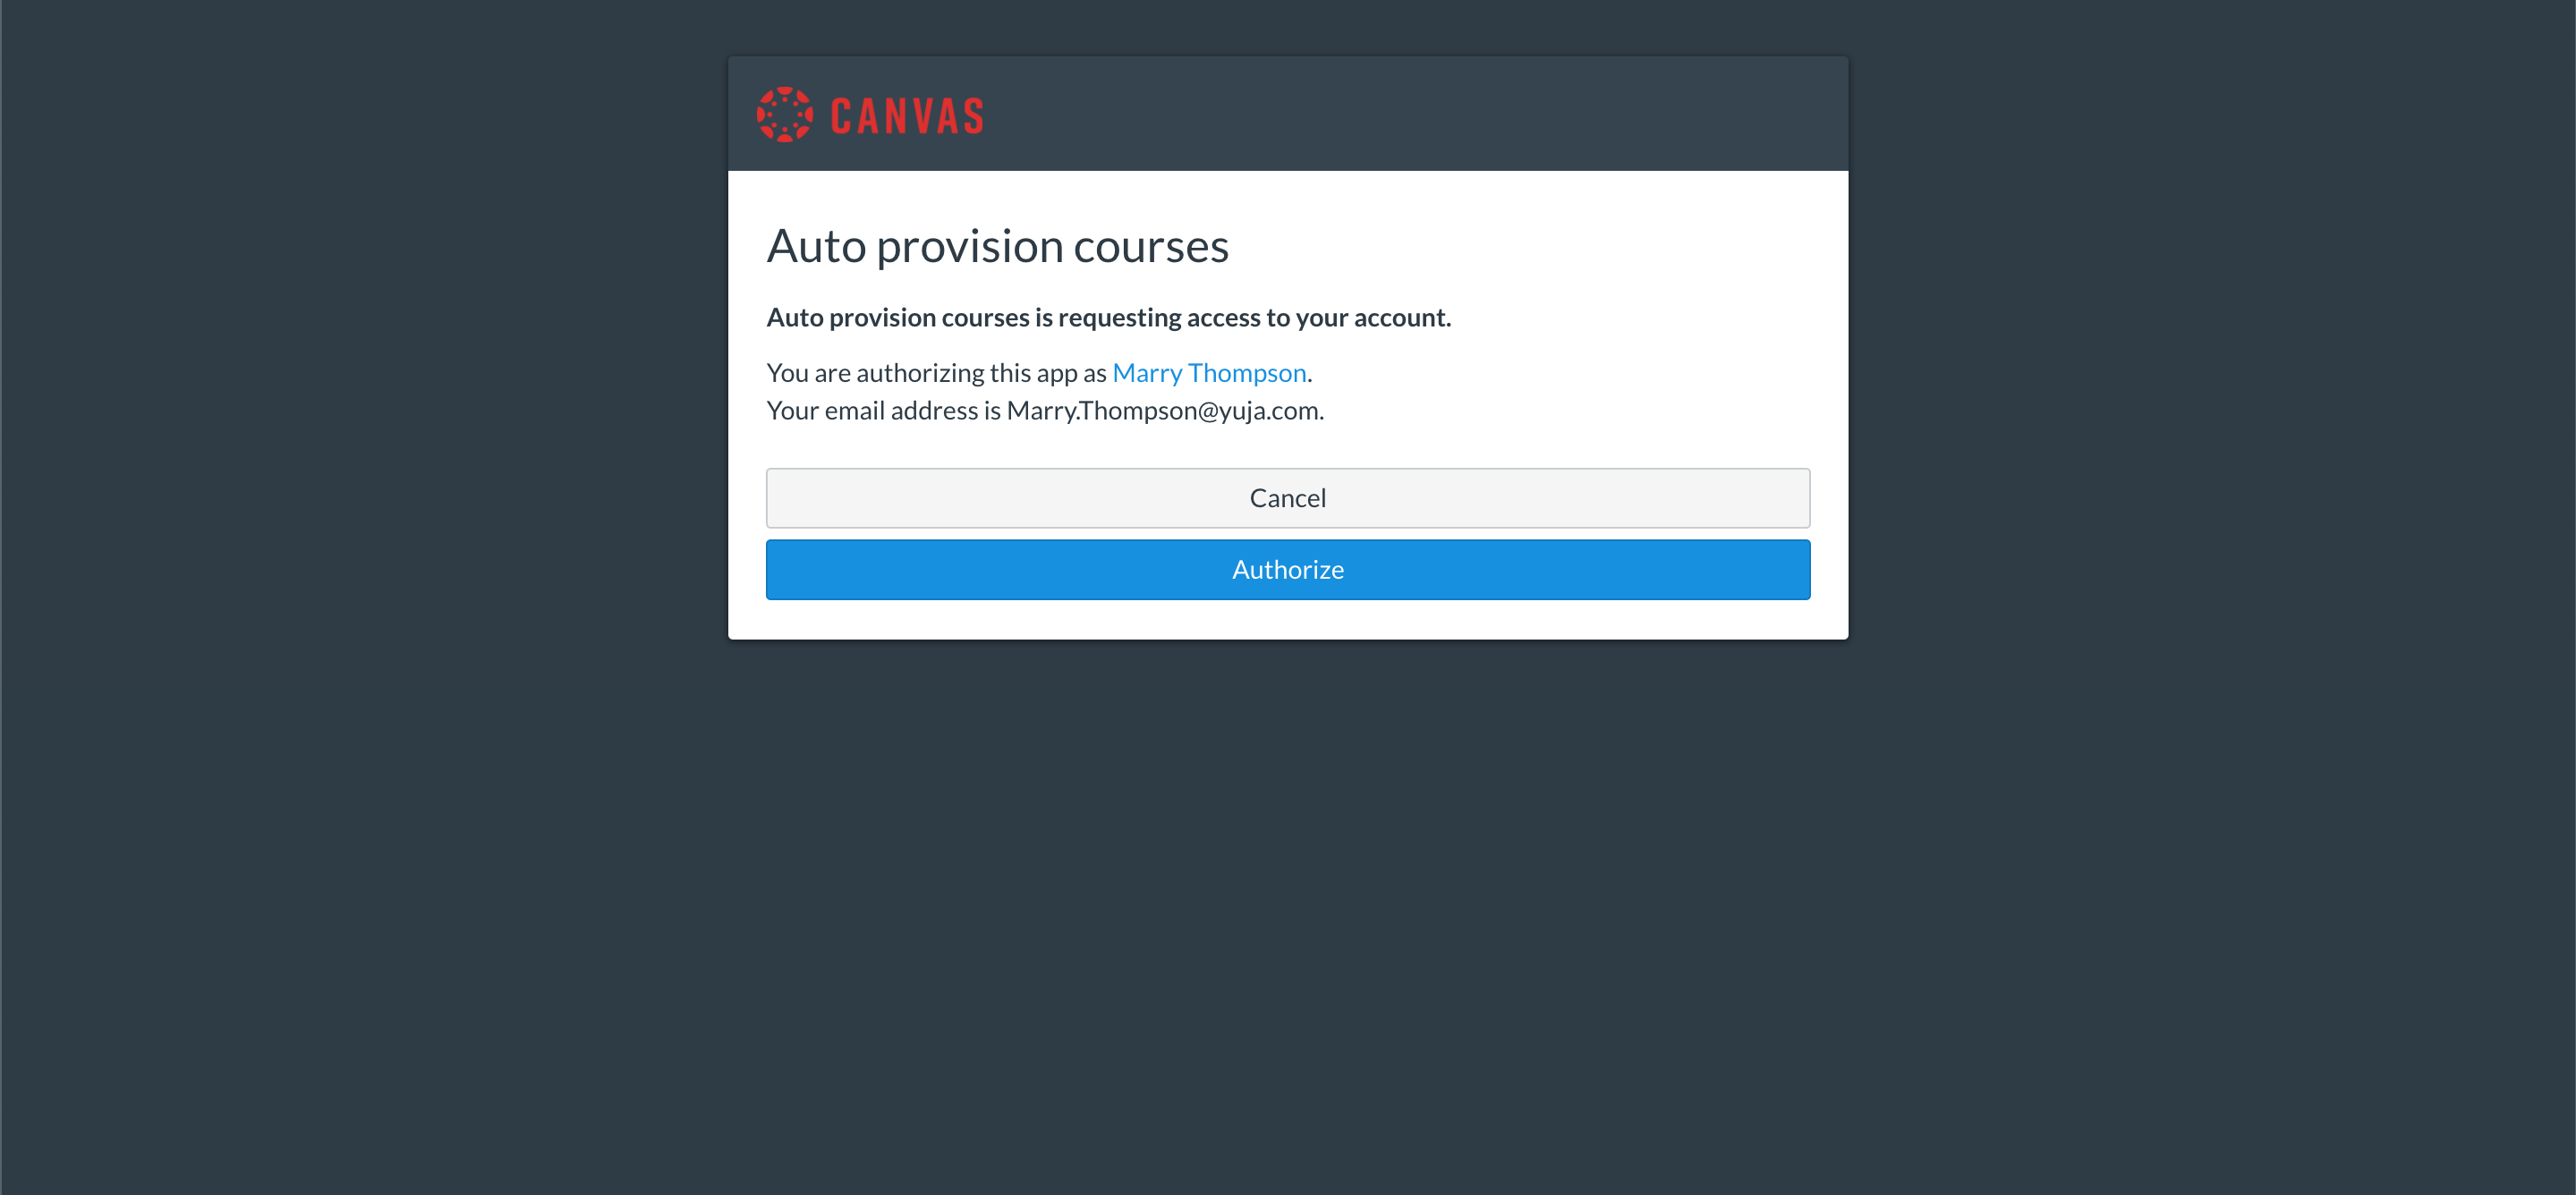 Canvas confirmation page for auto provisioning courses.